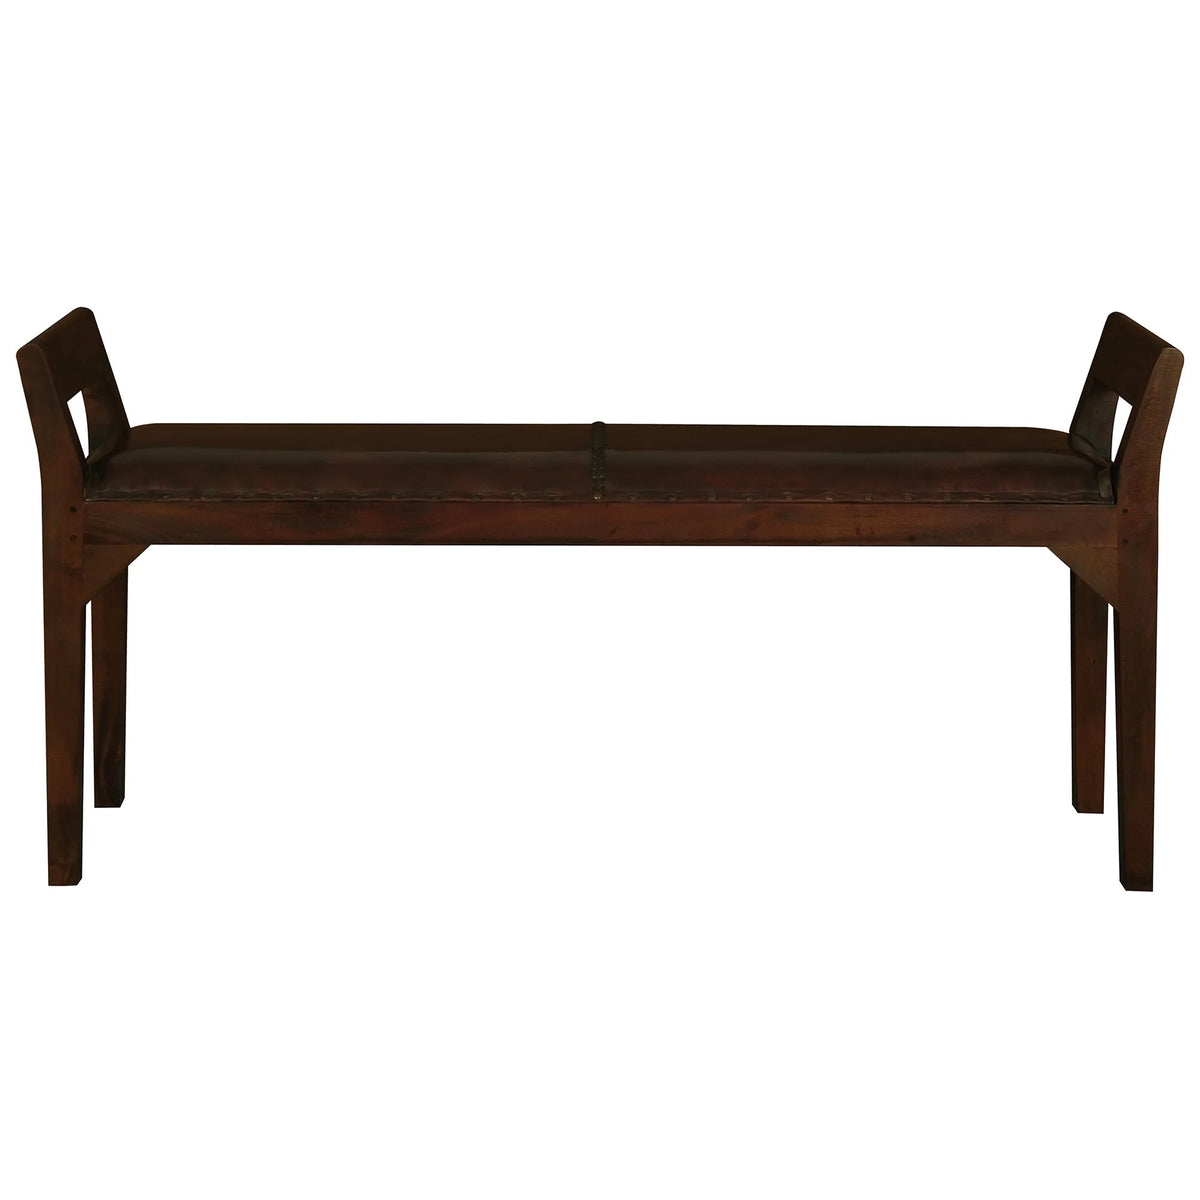 Boston Timber and Leather 2 Seater Bench - Mahogany - Notbrand